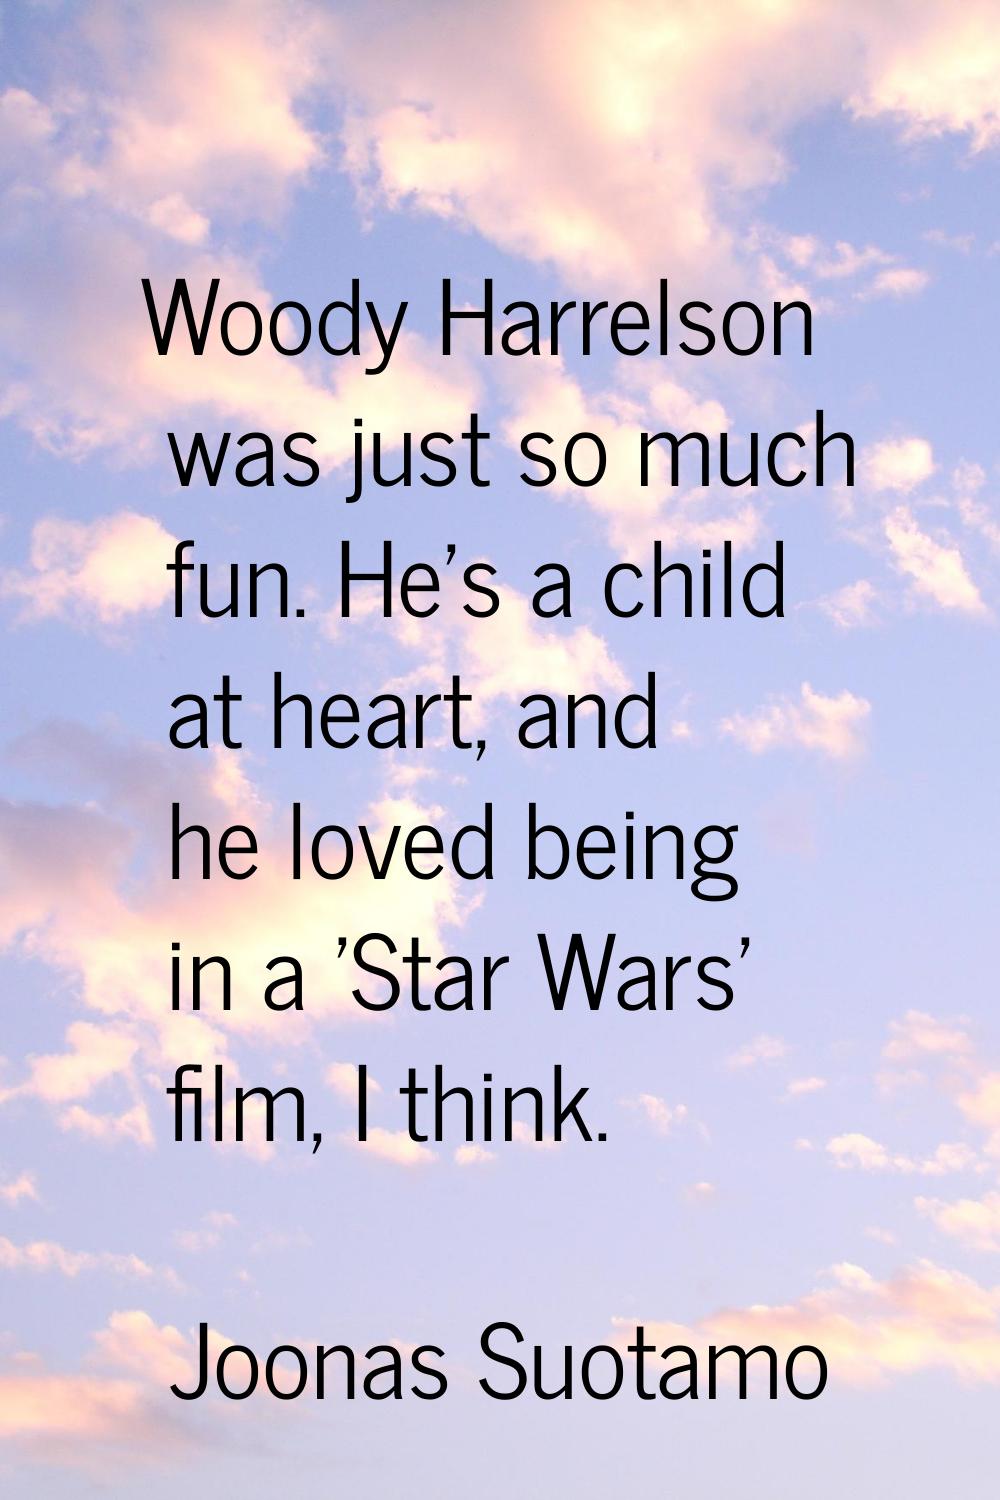 Woody Harrelson was just so much fun. He's a child at heart, and he loved being in a 'Star Wars' fi